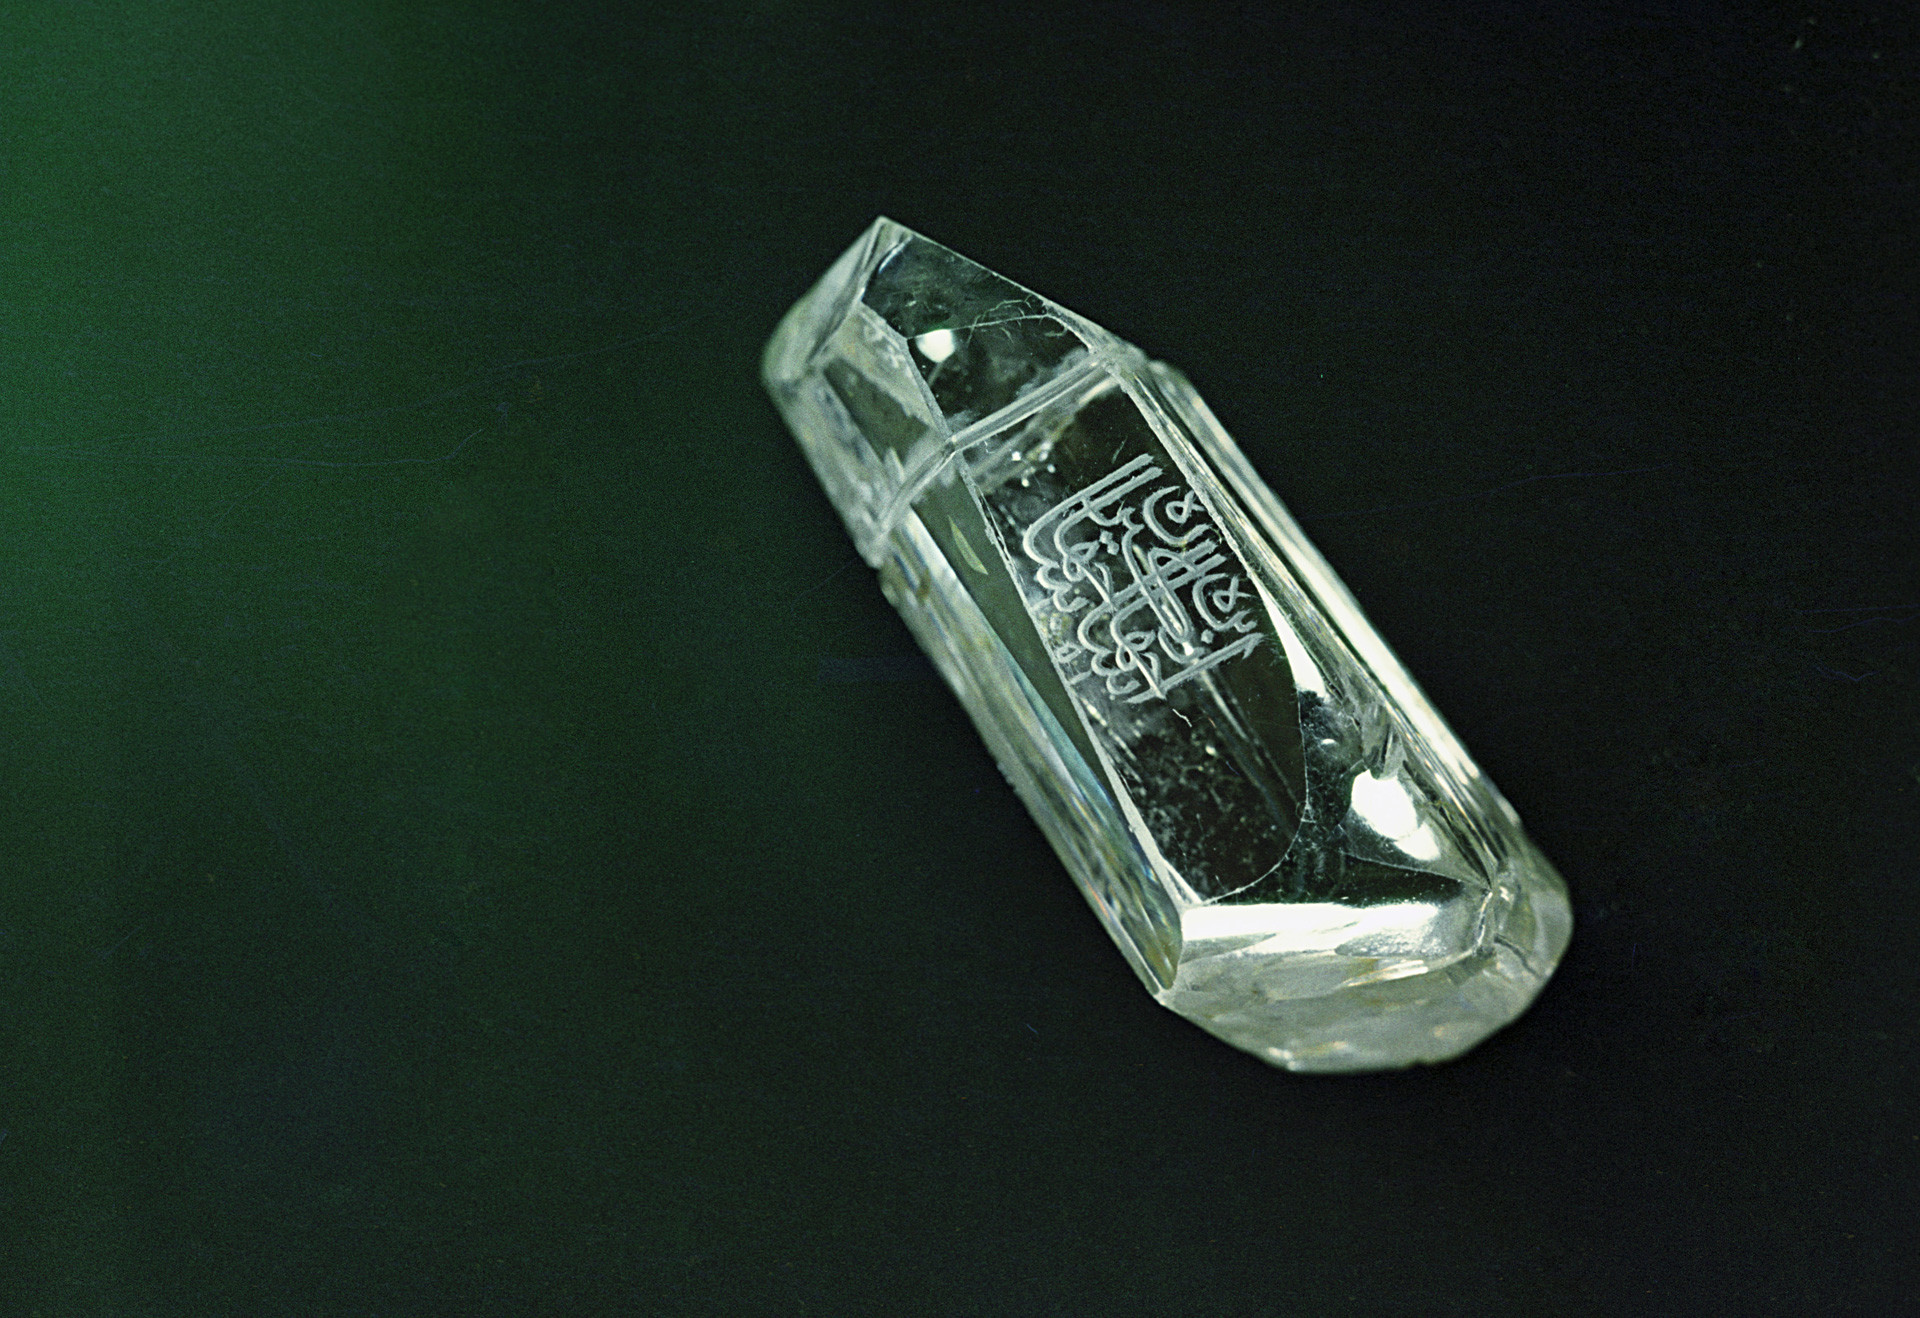 The Shah diamond, one of the Seven Historic Gems of the Russian Diamond Depository.